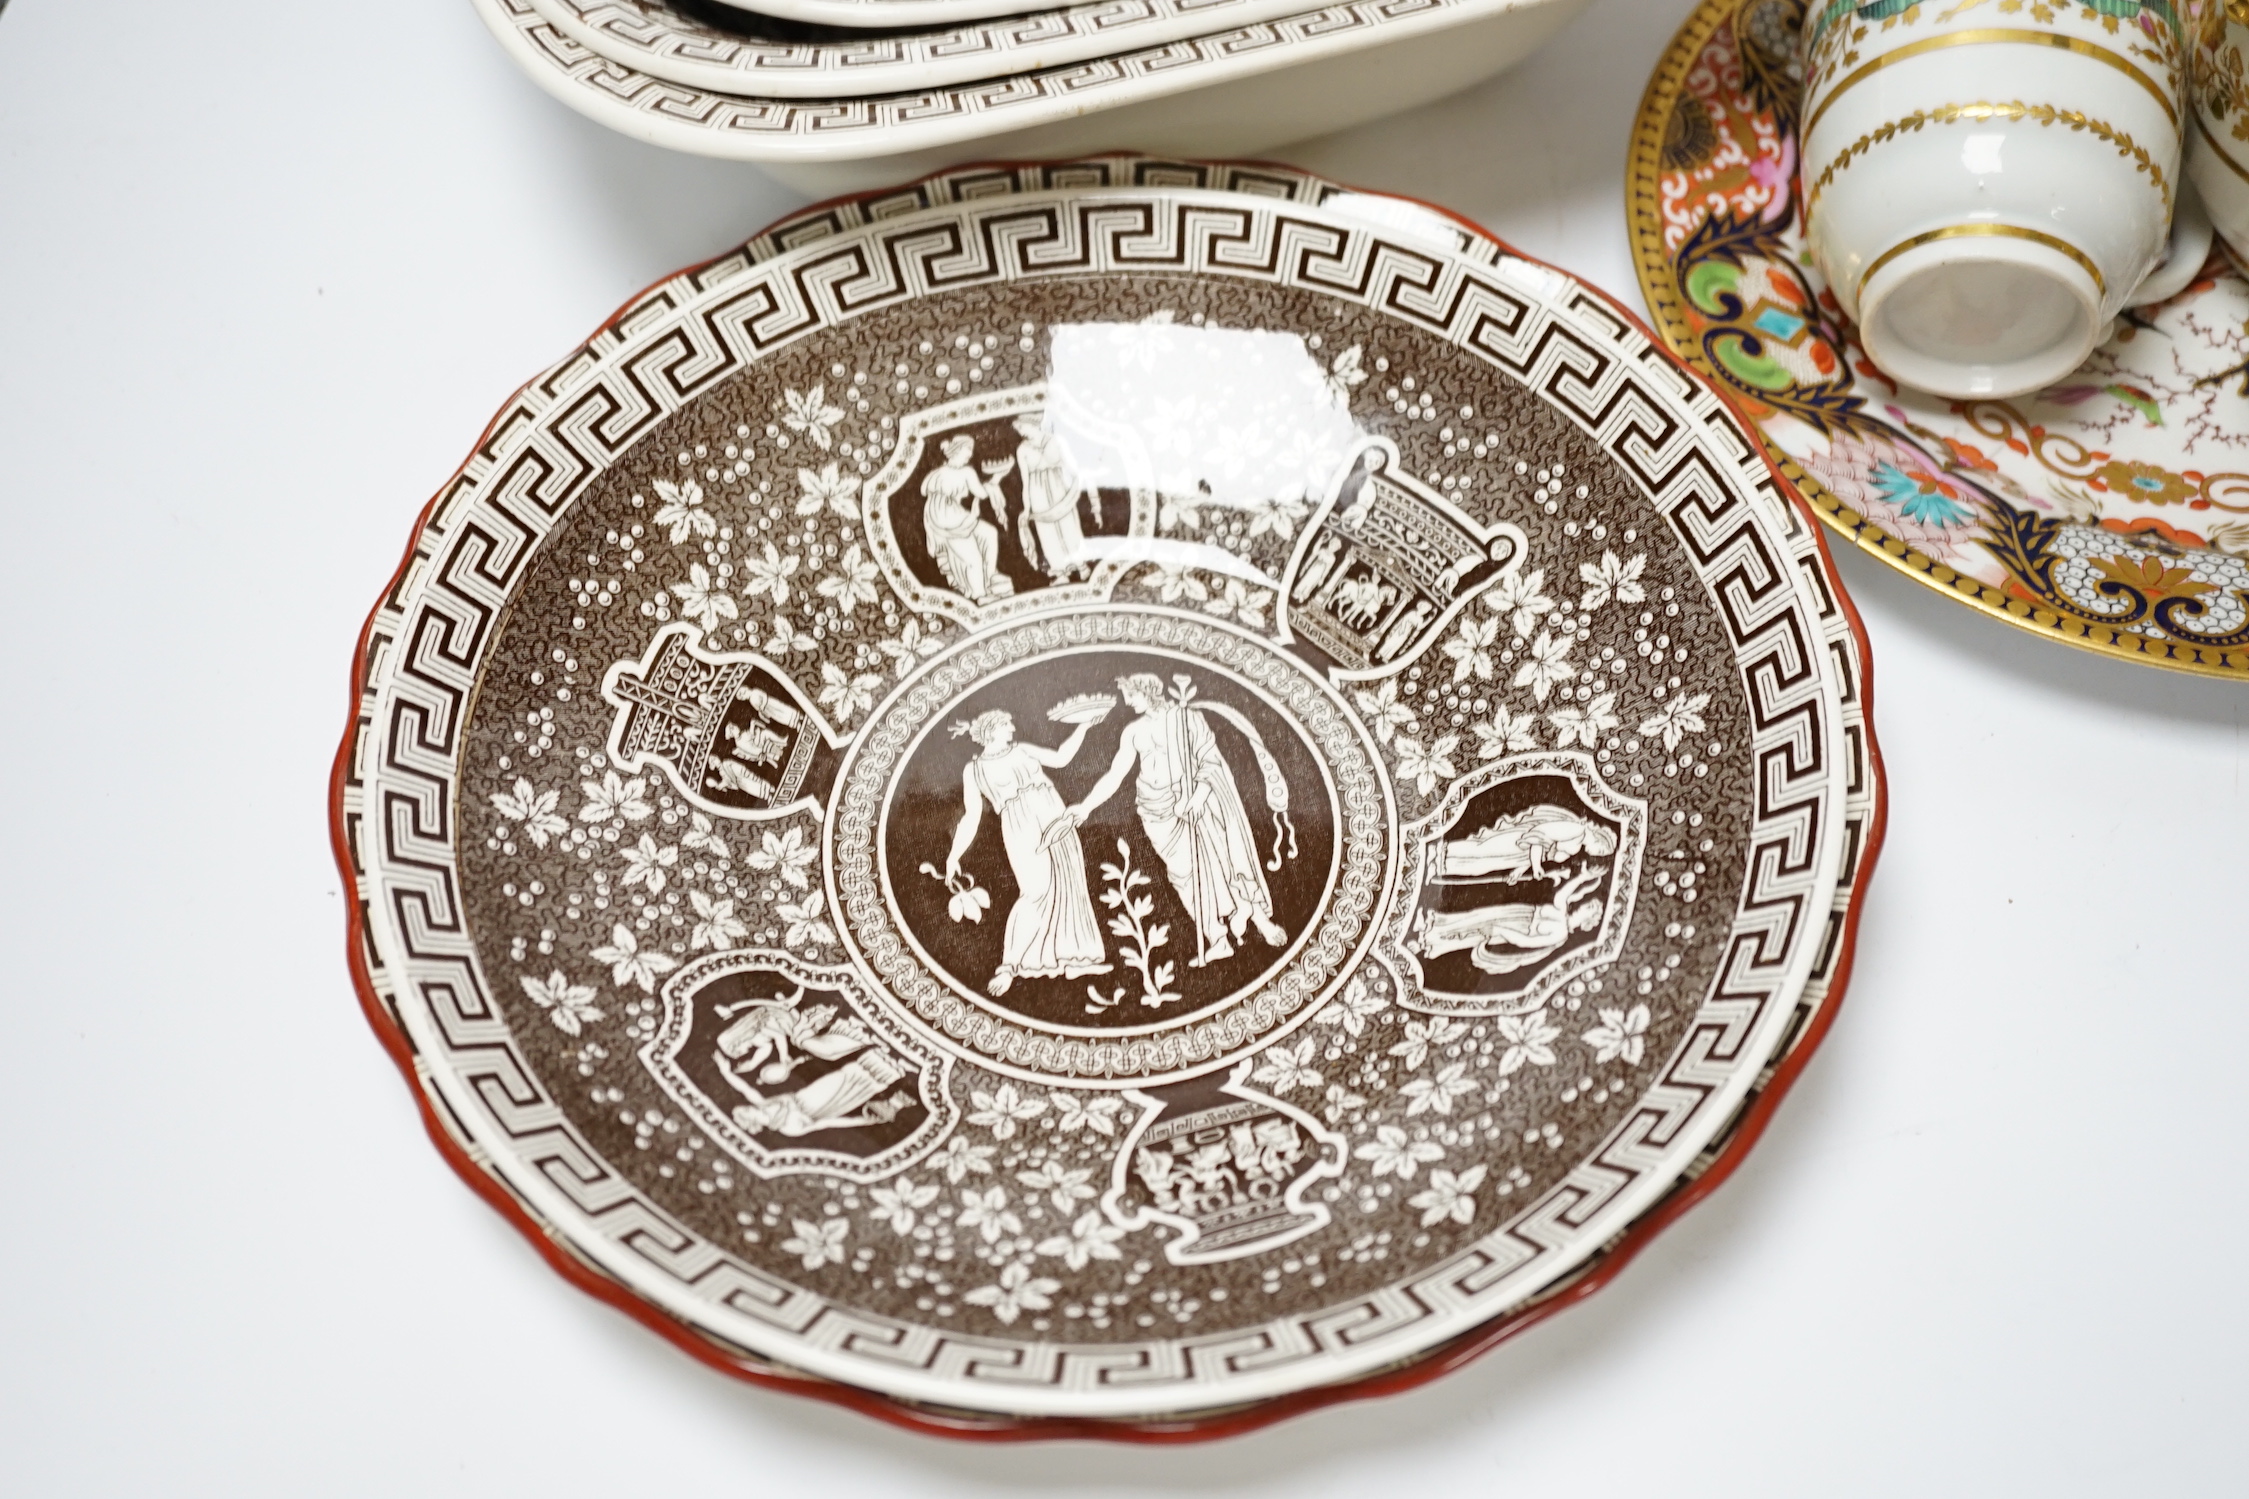 A group of Copeland Spode Grecian pattern dishes and sundry ceramics including Staffordshire